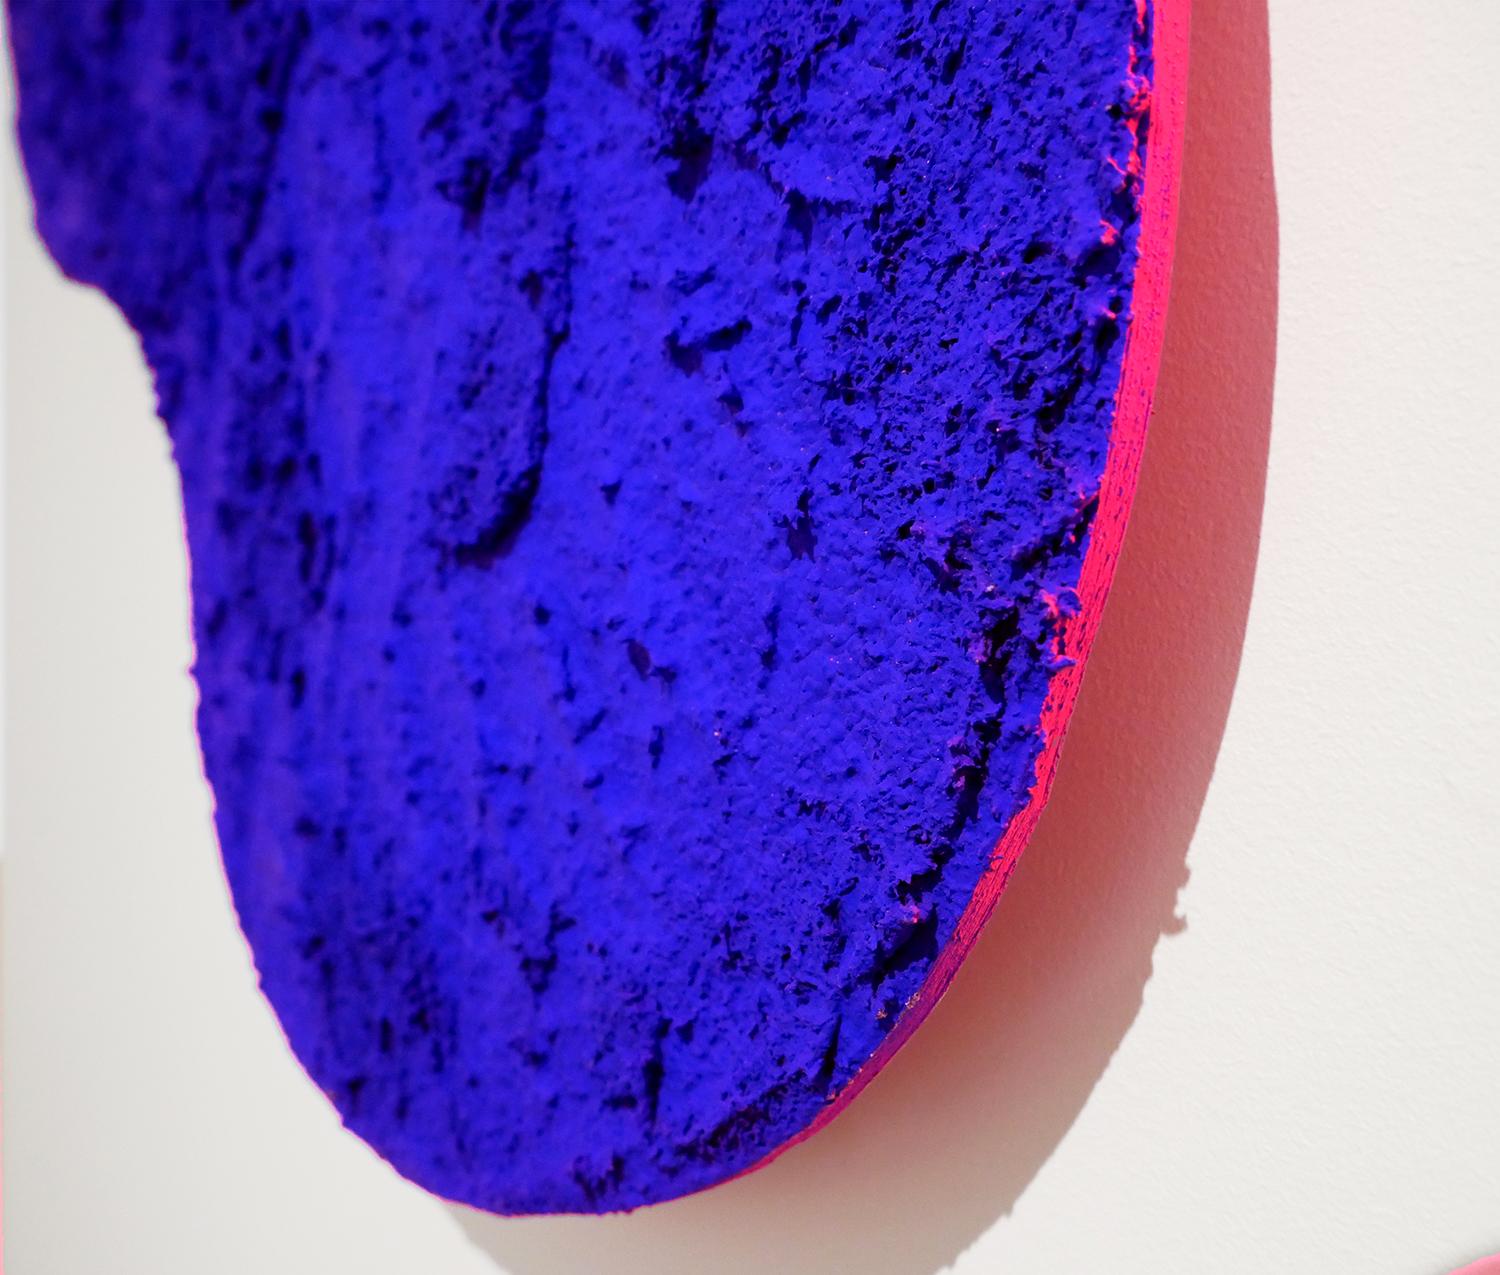 “Settled” Bright Blue Biomorphic Sawdust Shape with Pink Back Painting 2